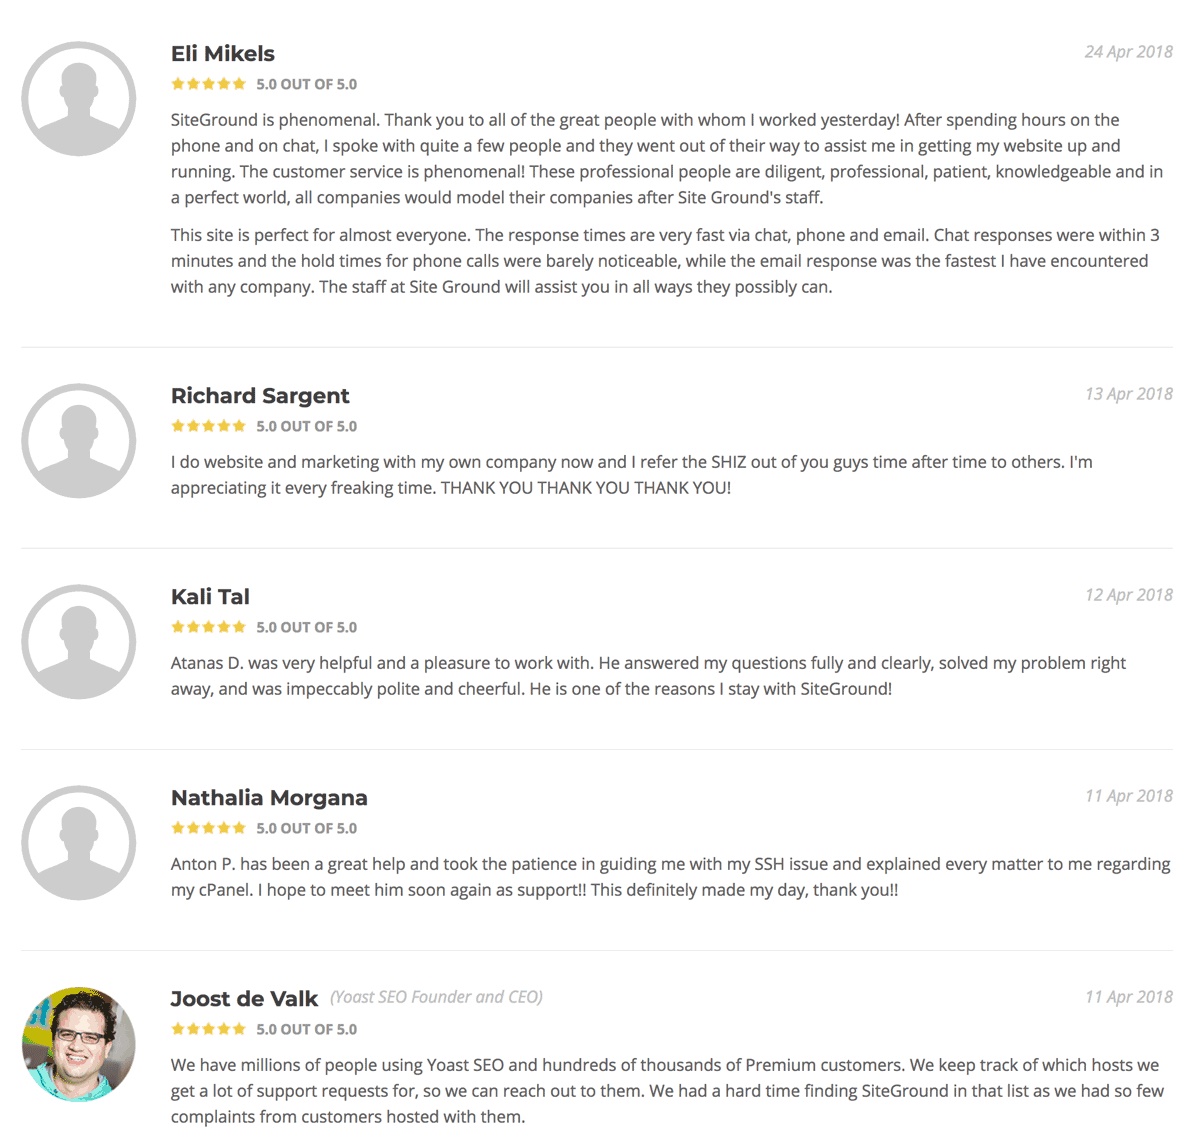 What users say about SiteGround